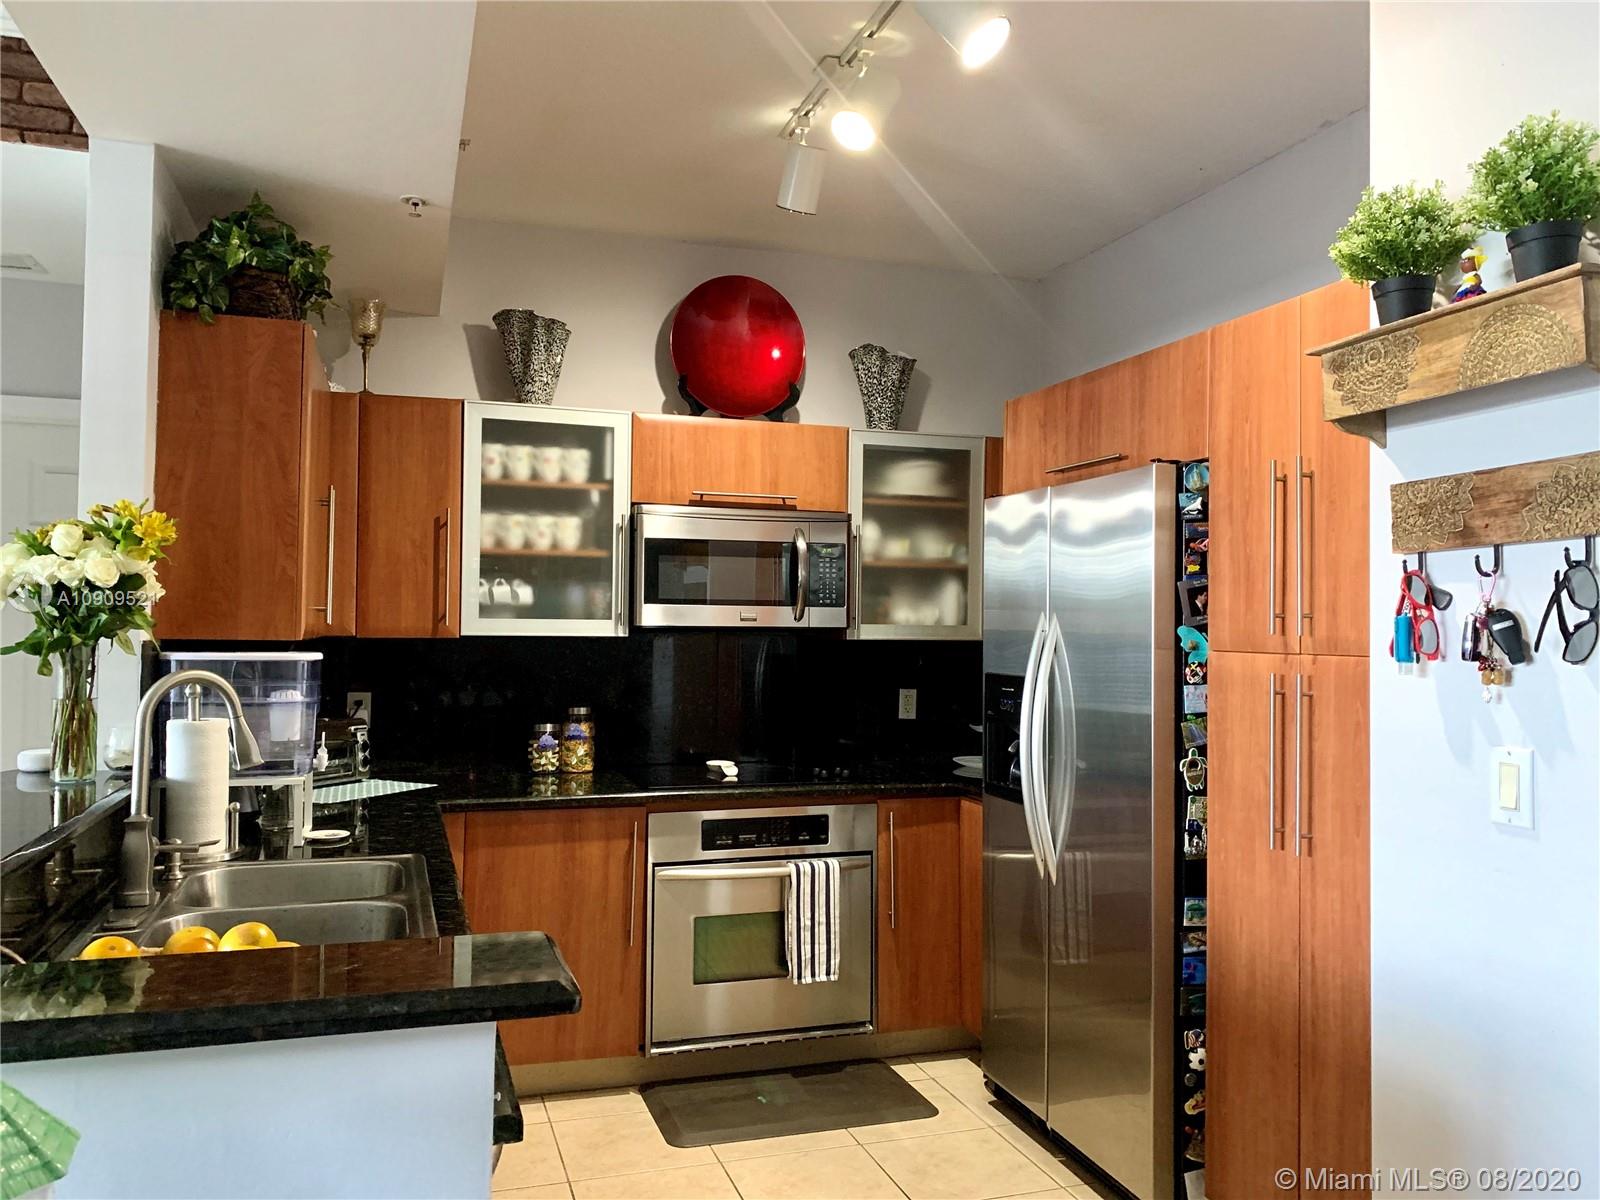 a kitchen with stainless steel appliances granite countertop a refrigerator and a stove